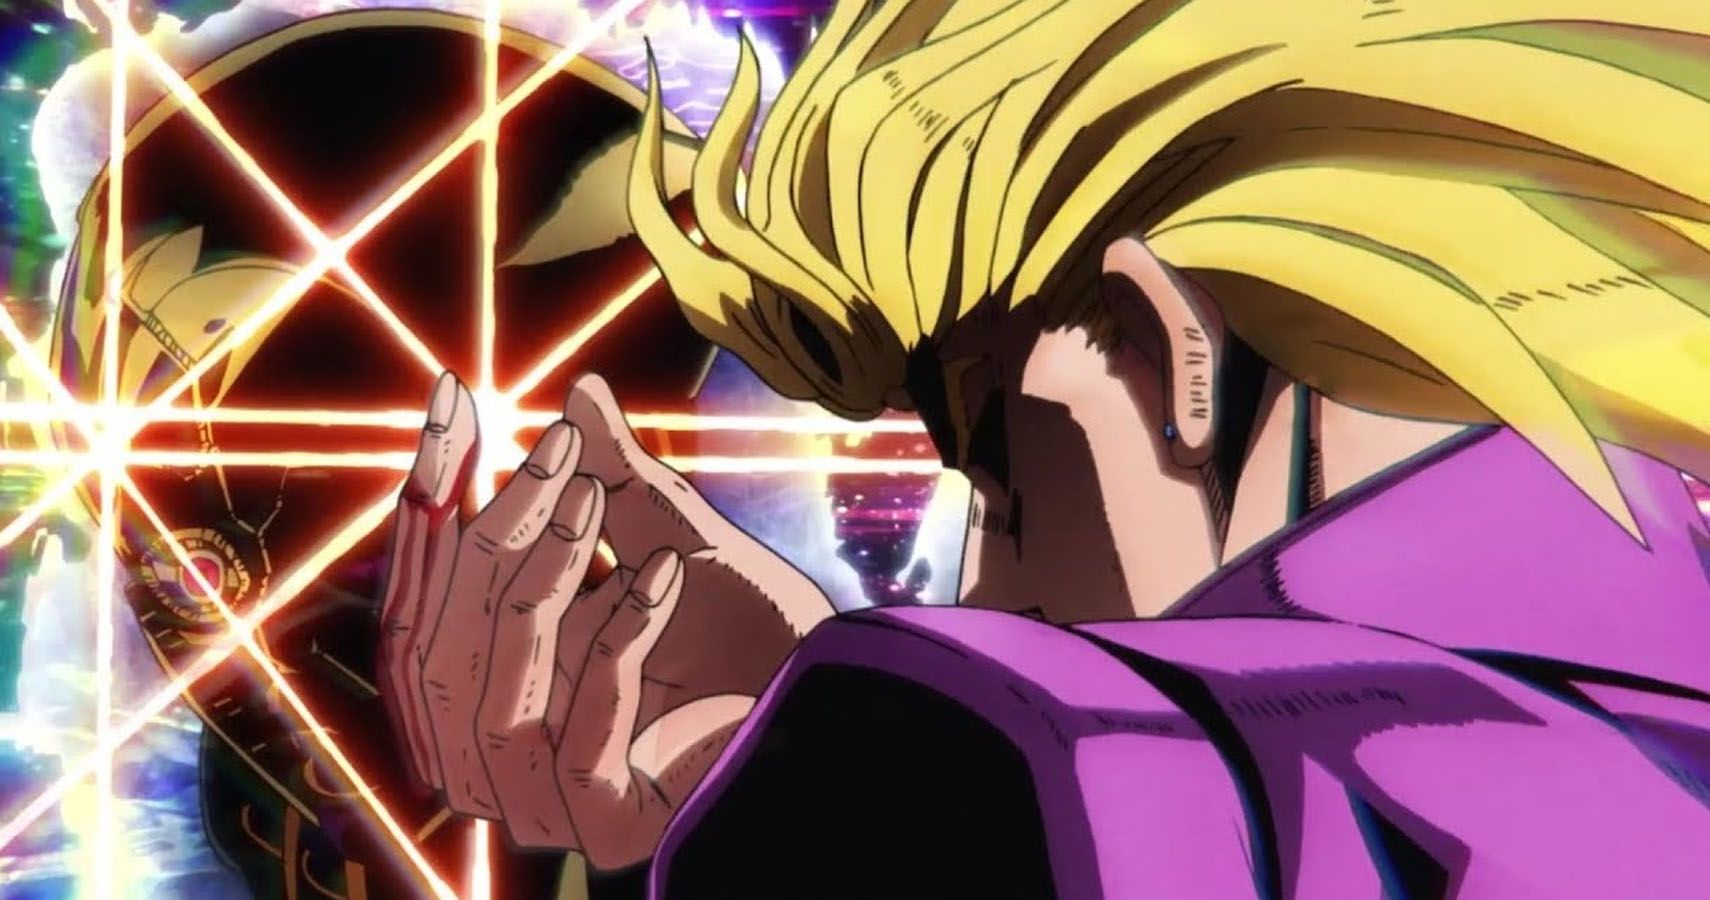 Who would win, Jotaro (before time stop) or Giorno (before requiem